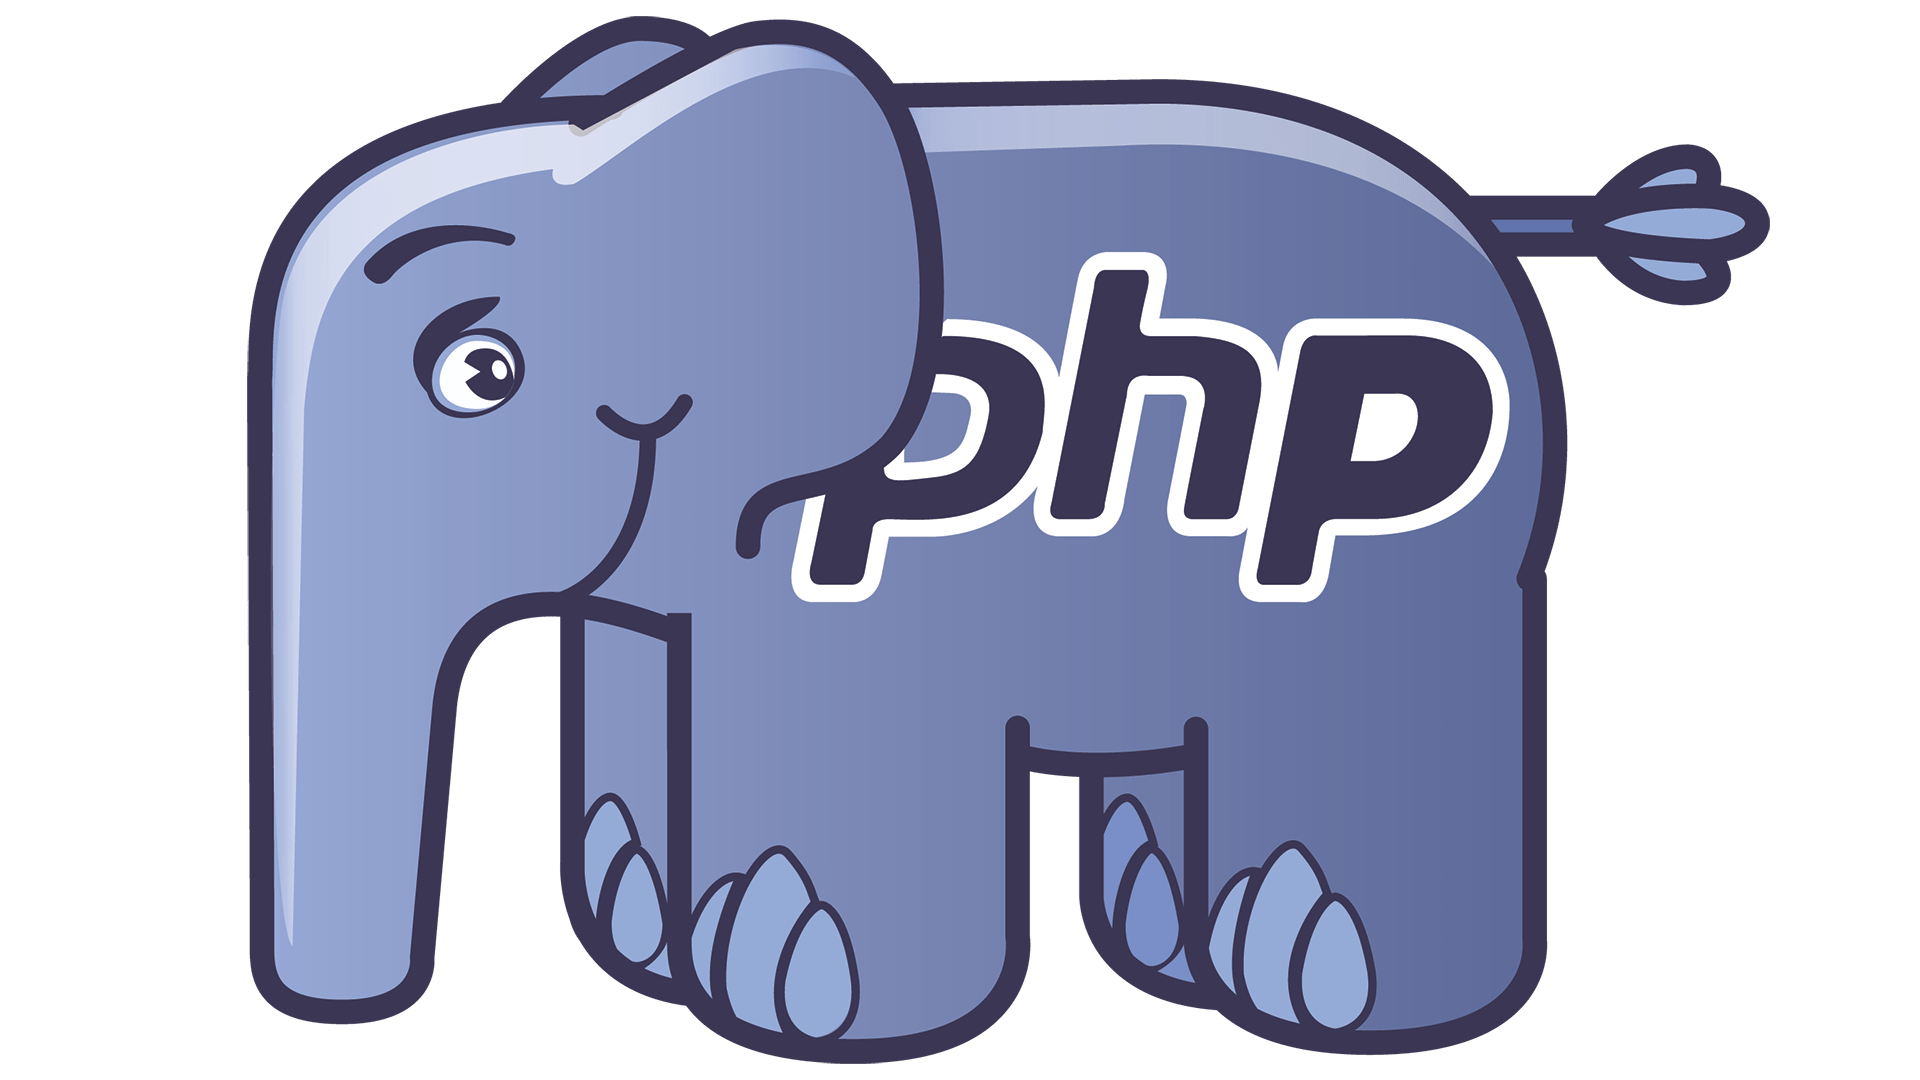 Php 7.0. Php. Php картинка. Php logo. Php слон.